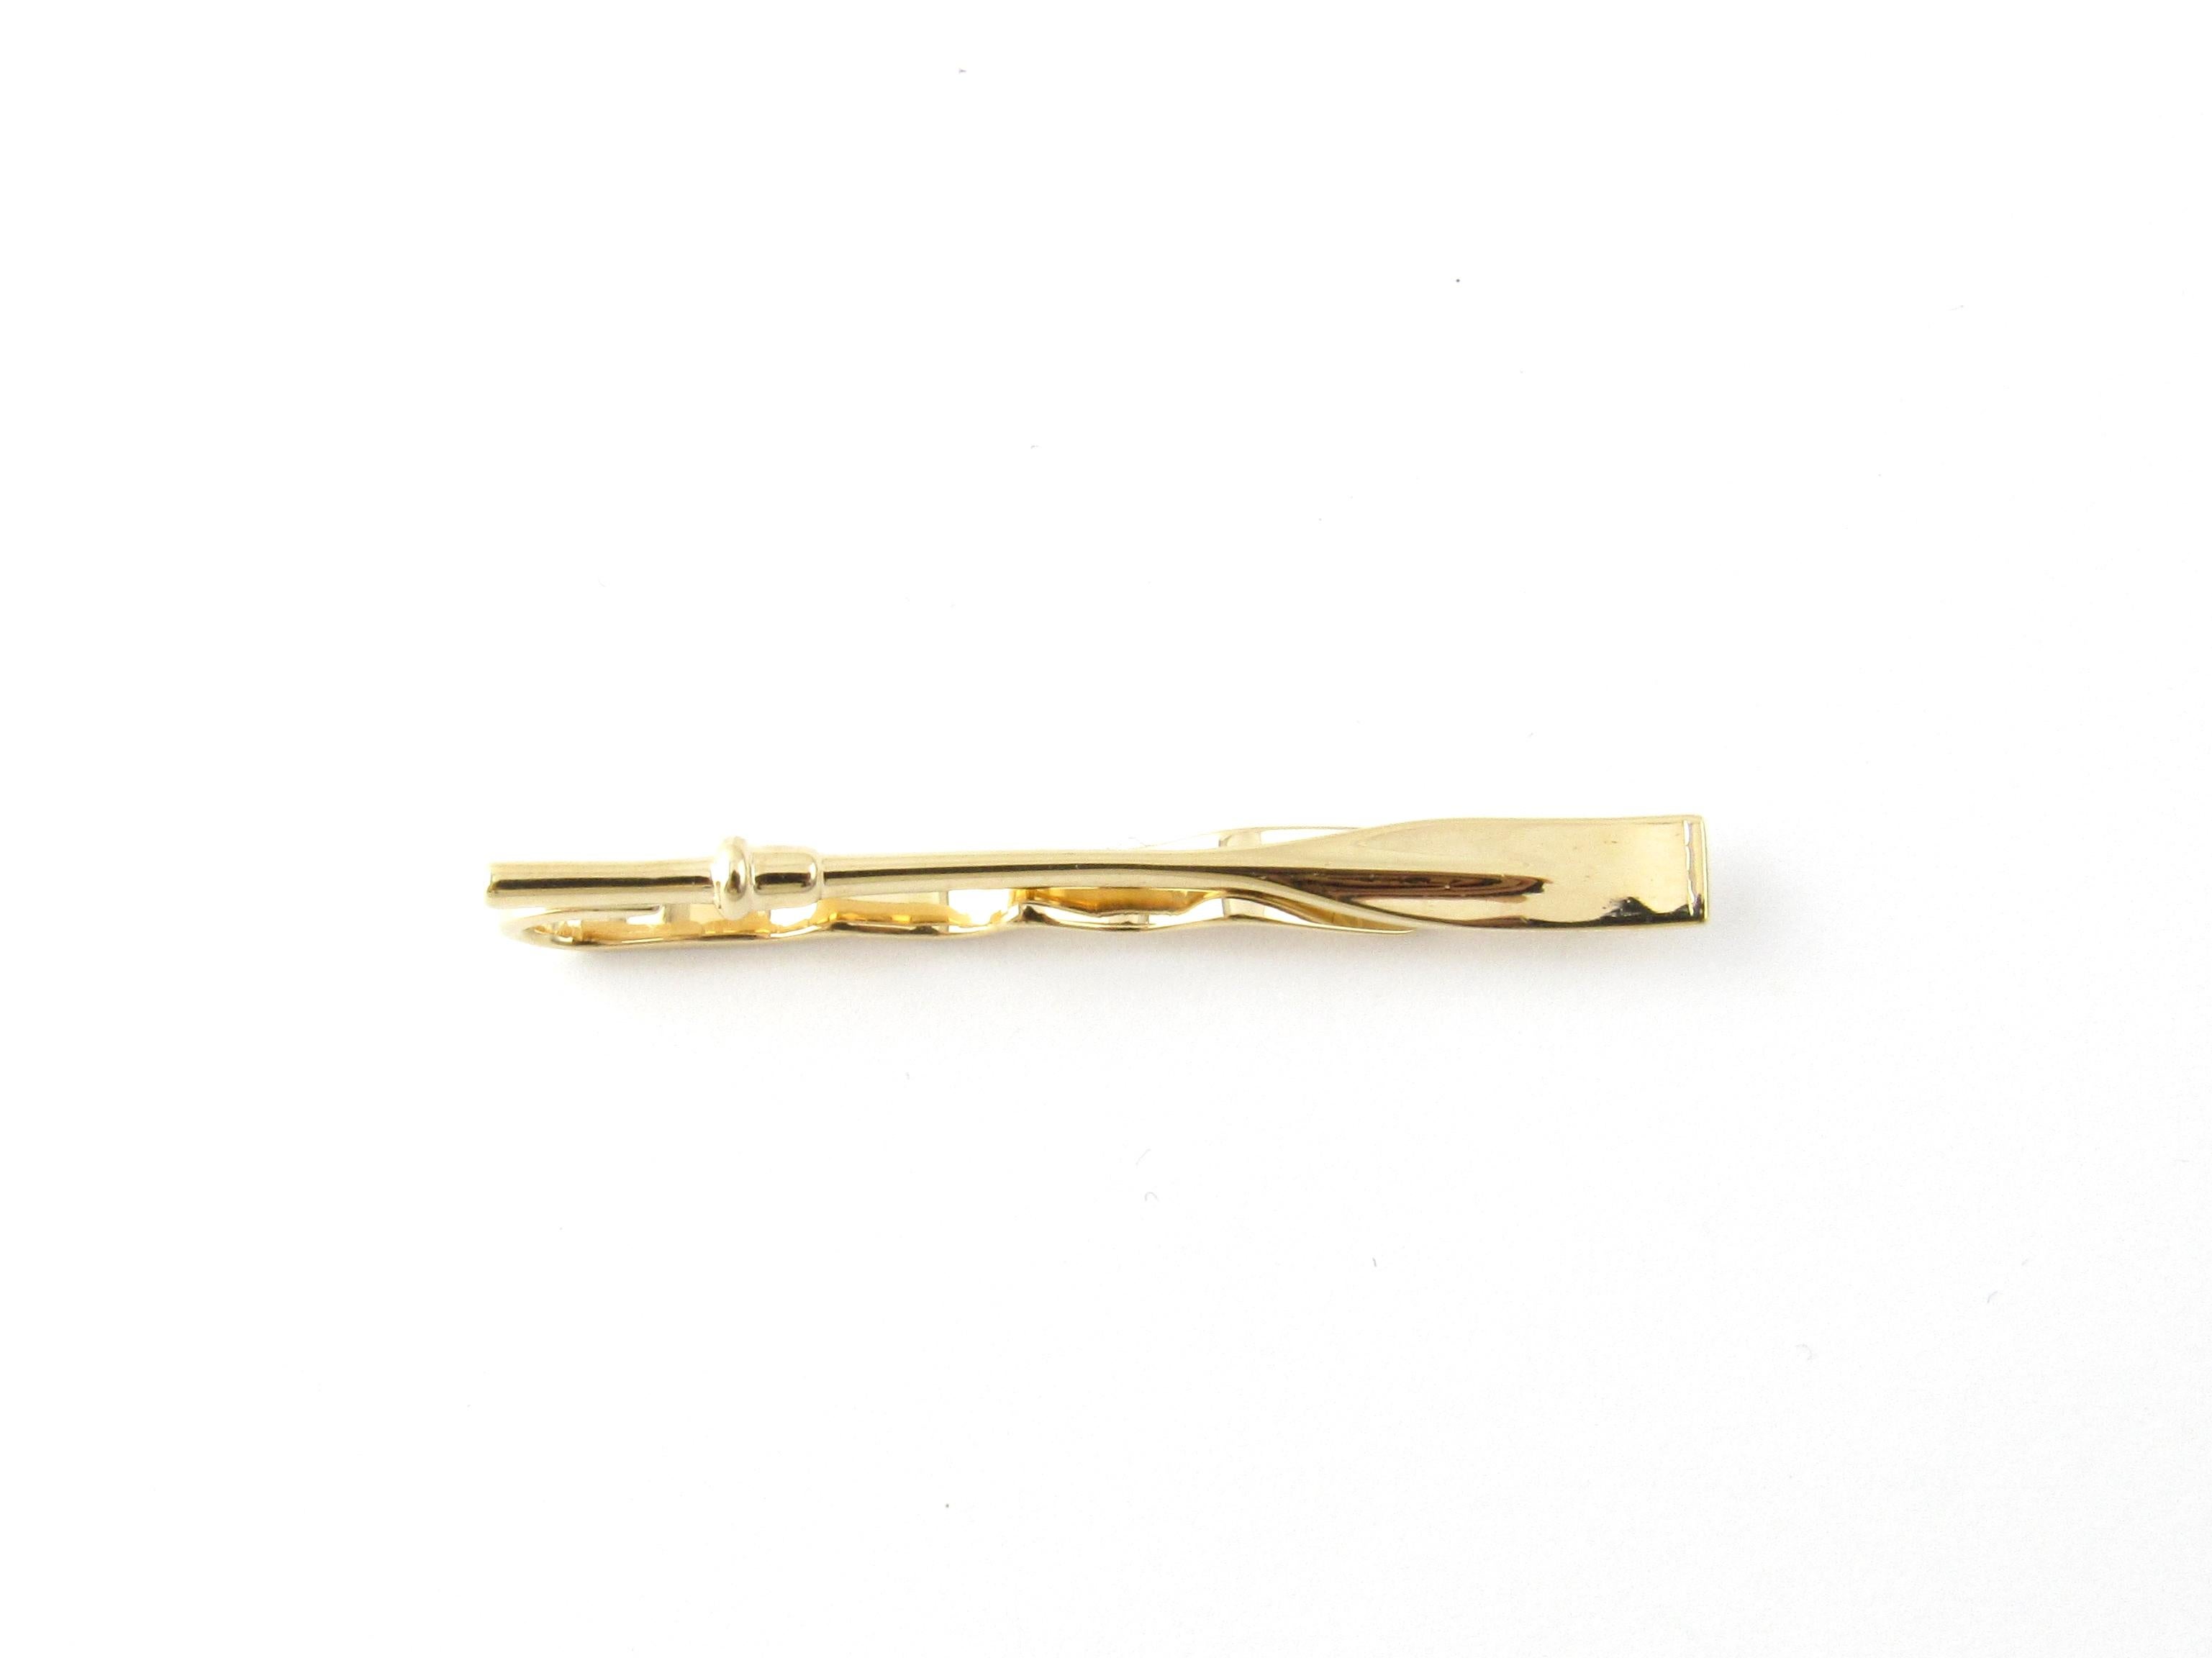 14 Karat Yellow Gold Oar Tie Bar-

This elegant tie bar features a beautifully detailed oar crafted in classic 14K yellow gold.

Size:  50 mm x 5 mm

Weight:  2.3 dwt. /  3.6 gr. 

Stamped: 14K 

Very good condition, professionally polished. 

Will